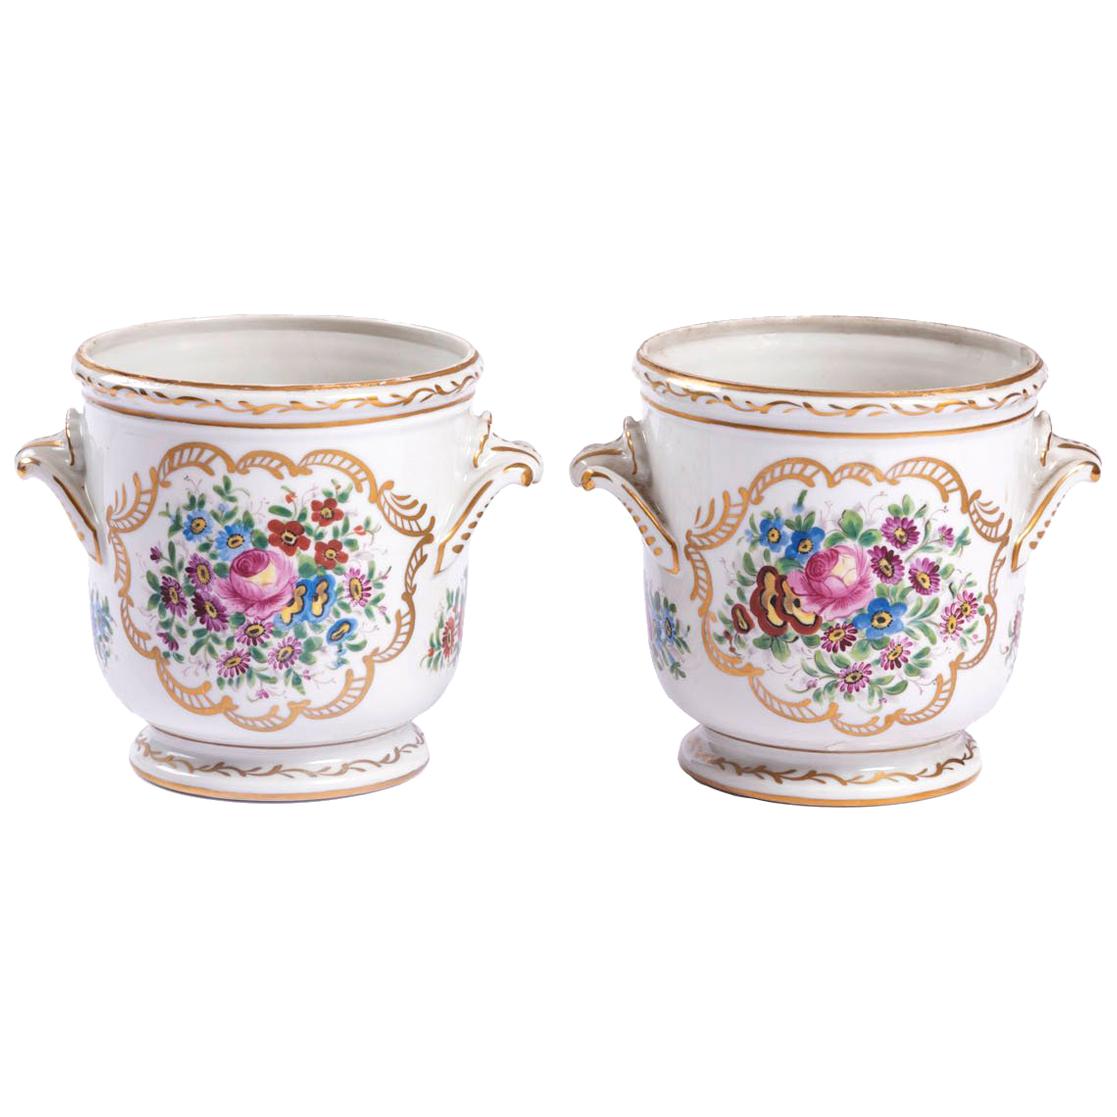 Pair of Limoges Porcelain Coolers with a Decor of Flowers, Early 20th Century